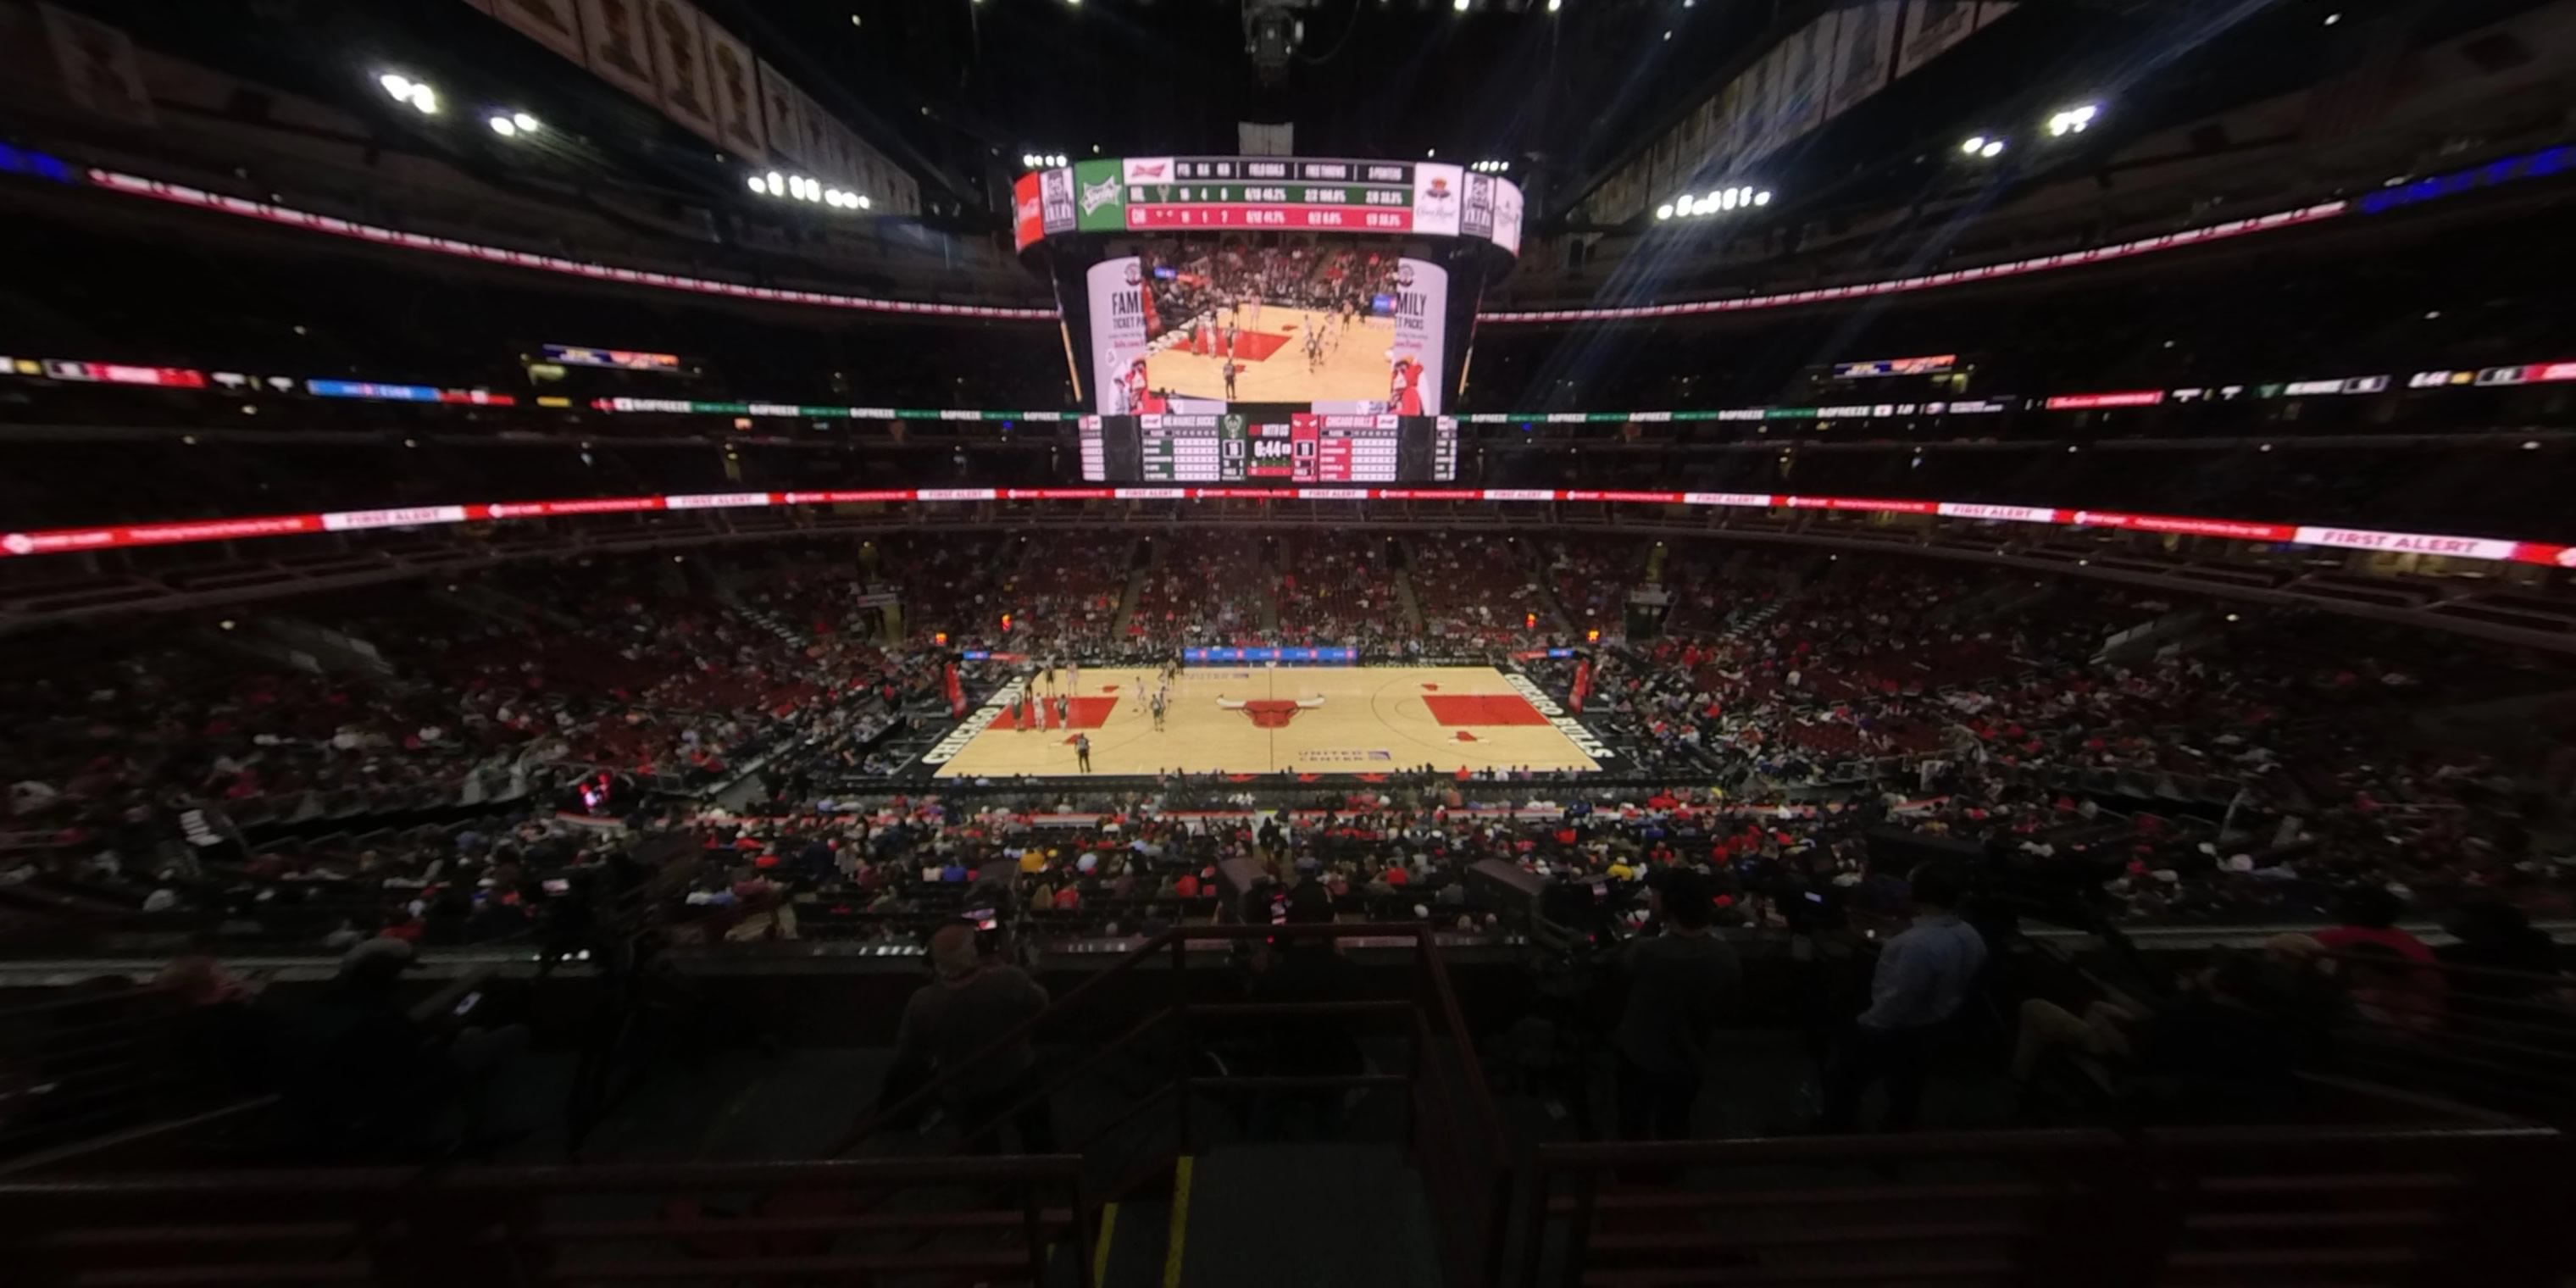 section 217 panoramic seat view  for basketball - united center